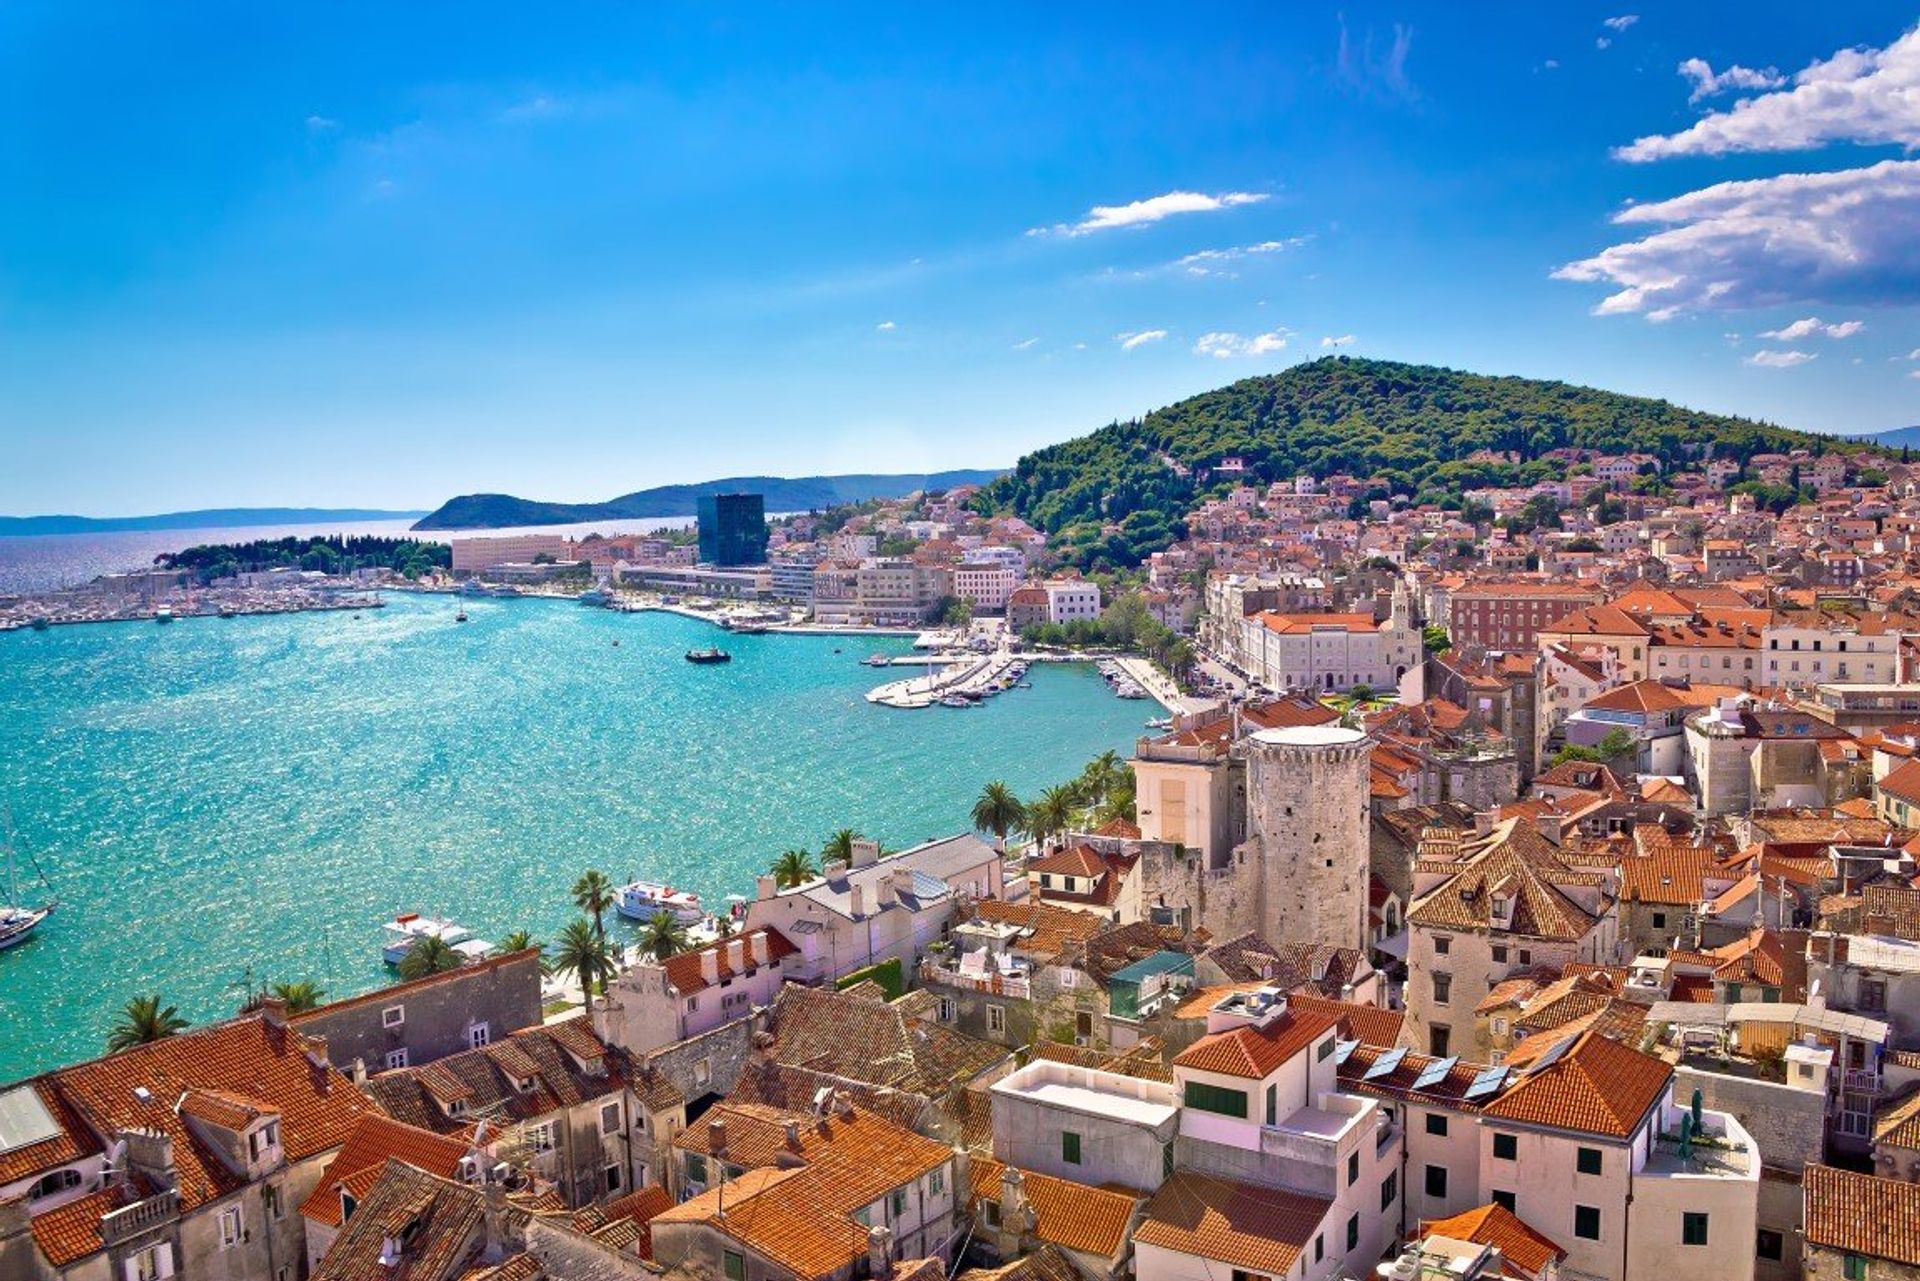 Take a short stroll from Split's old town to Marjan Hill, boasting excellent coastal views